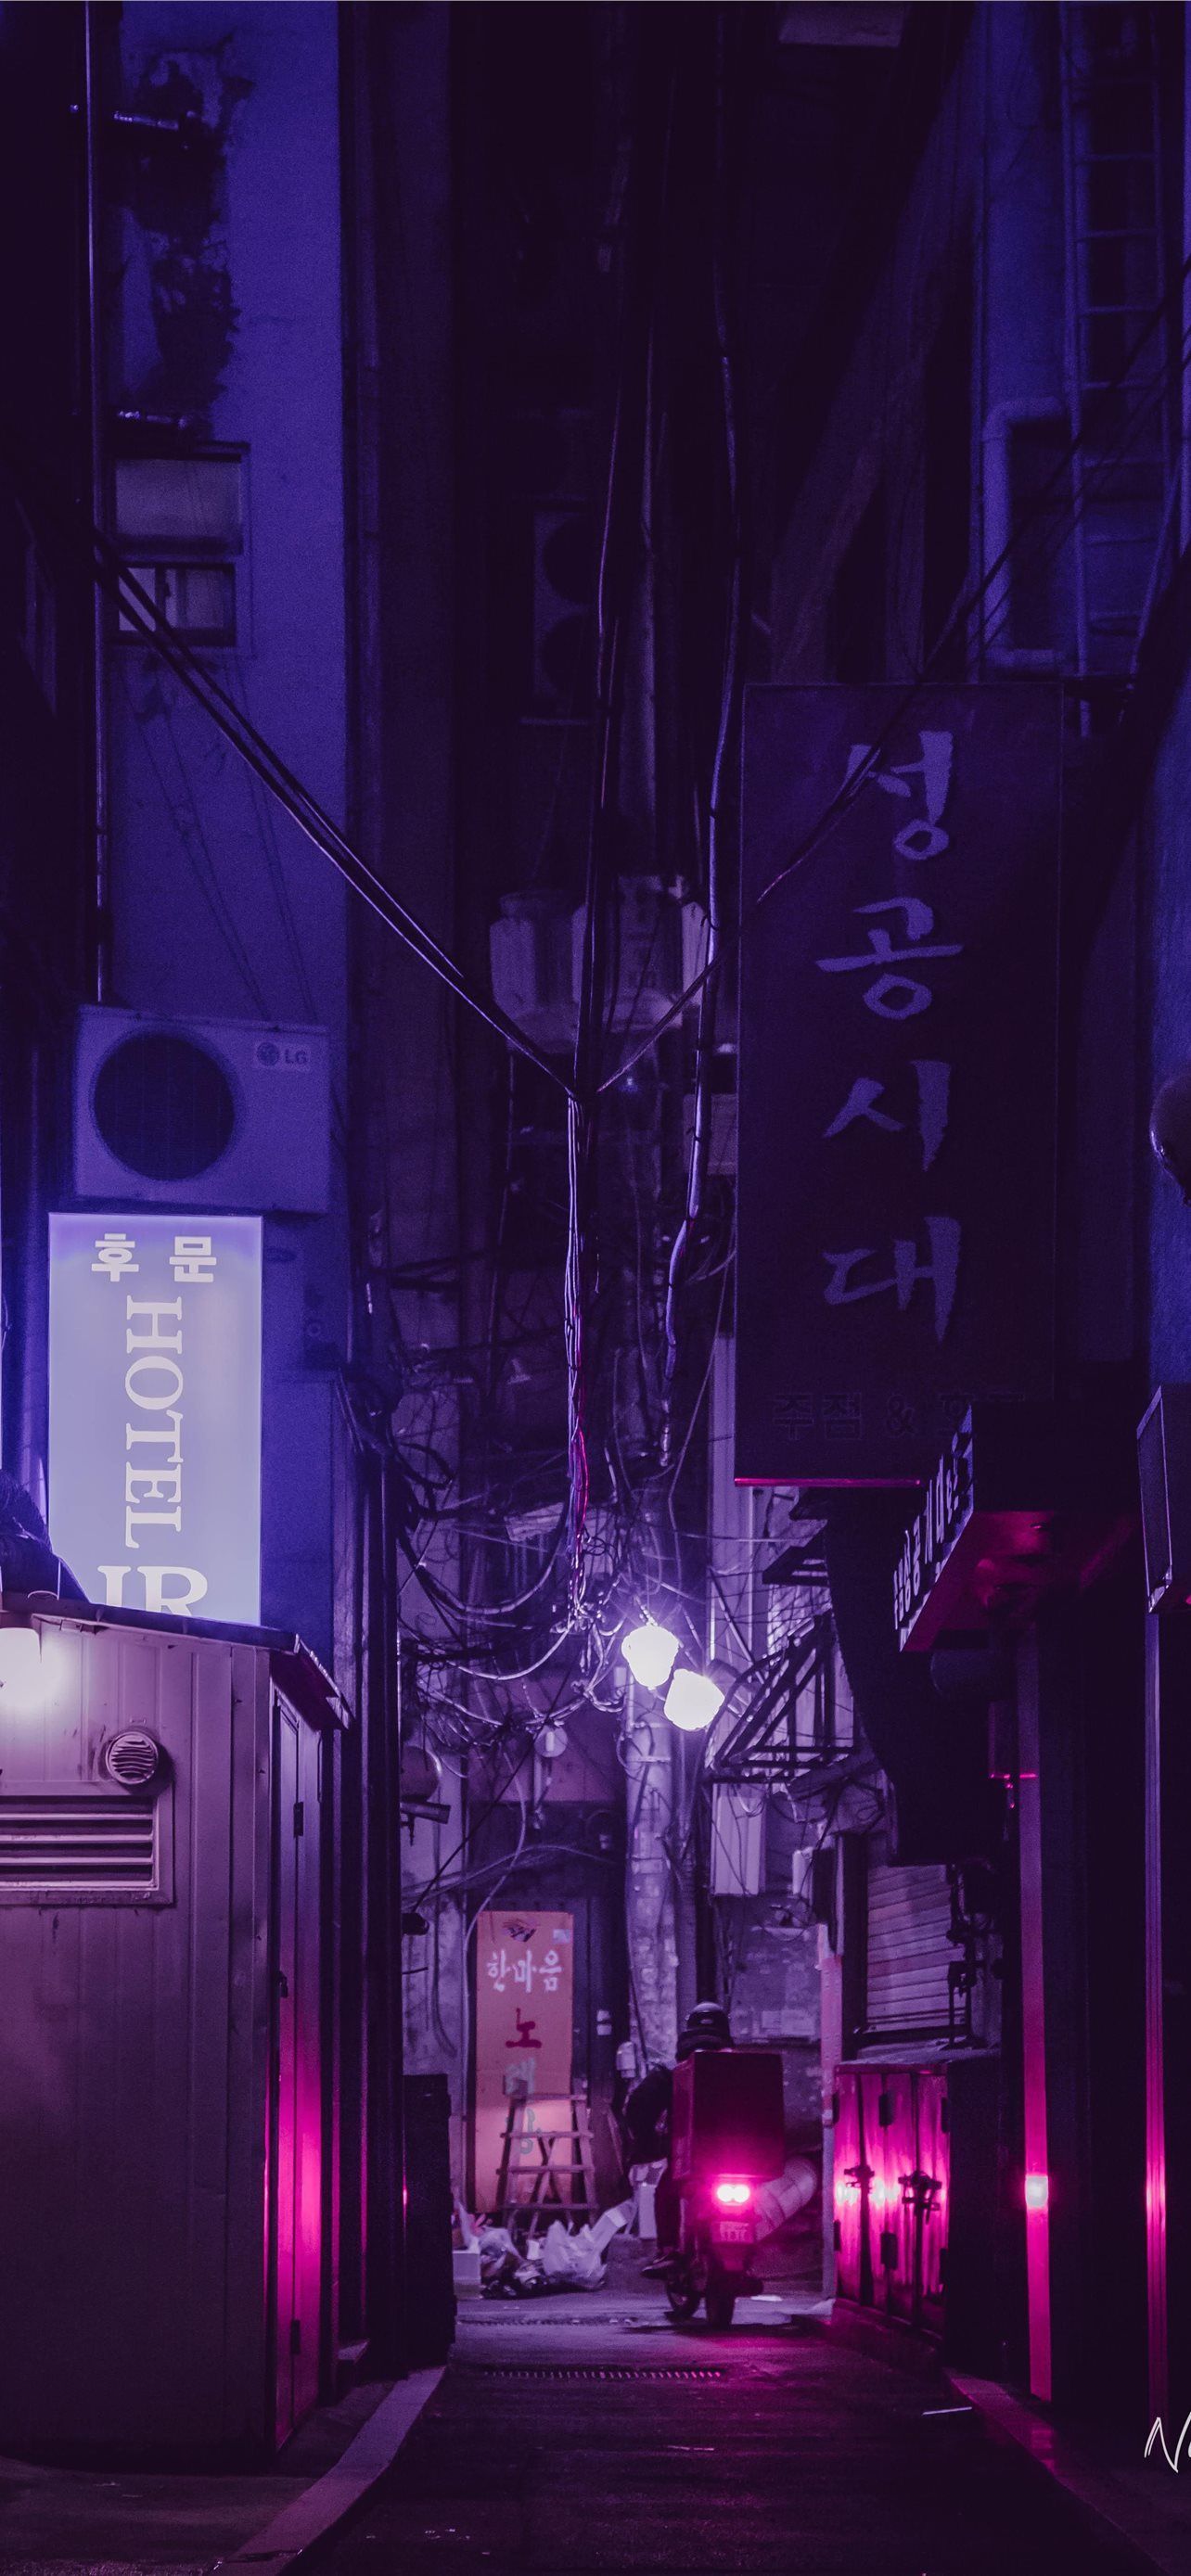 A dark alley with street lights and neon signs - Korean, Seoul